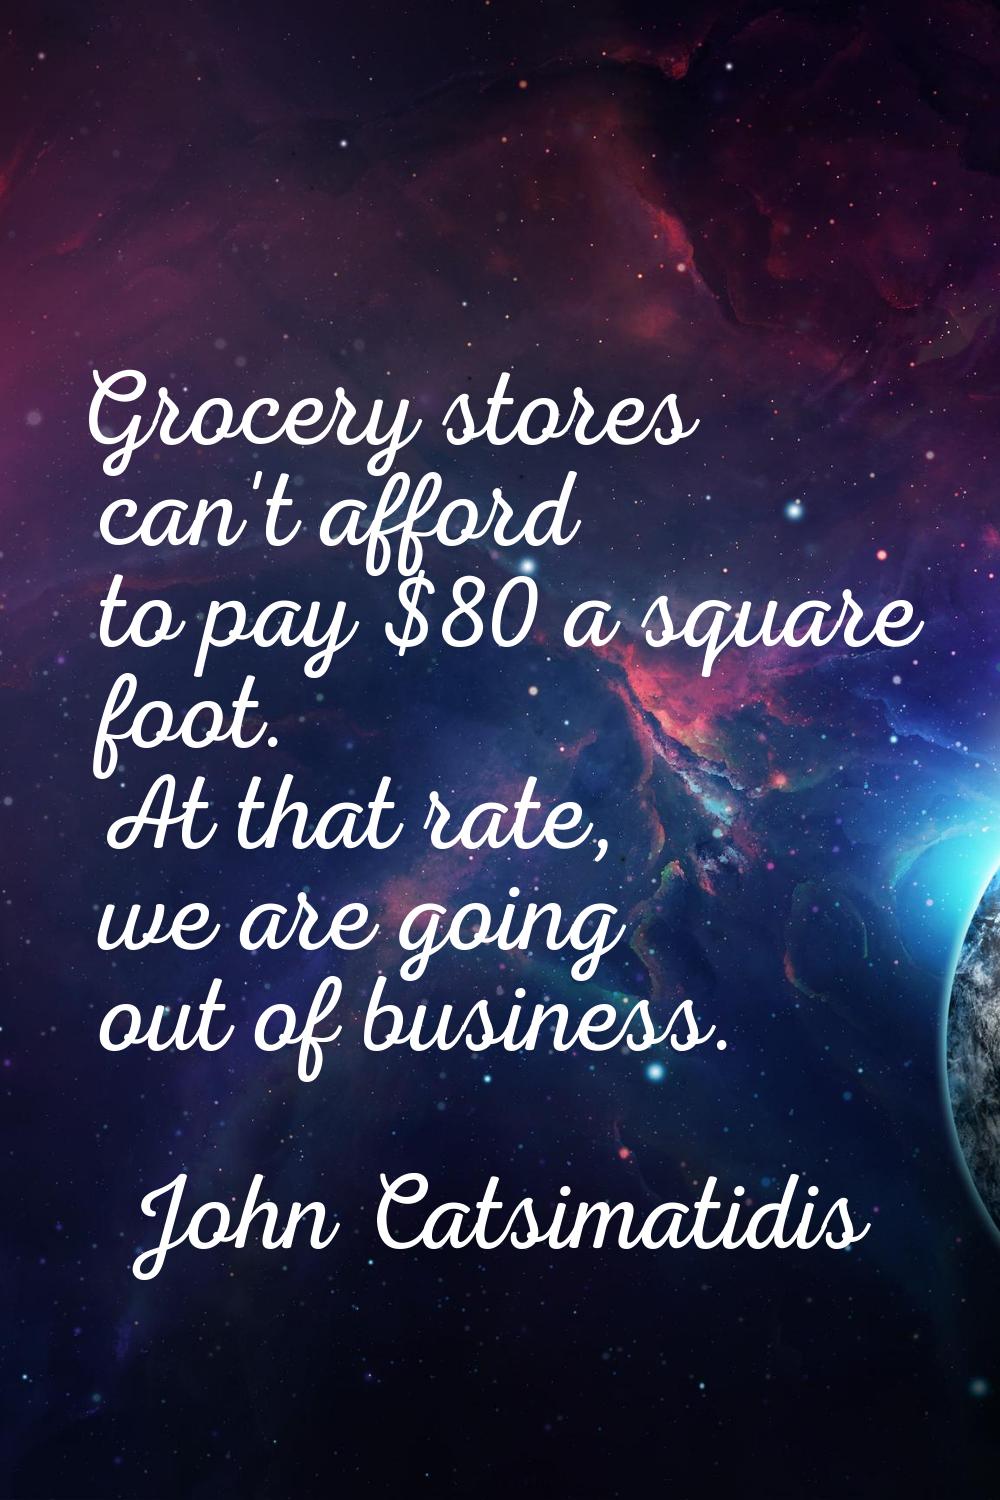 Grocery stores can't afford to pay $80 a square foot. At that rate, we are going out of business.